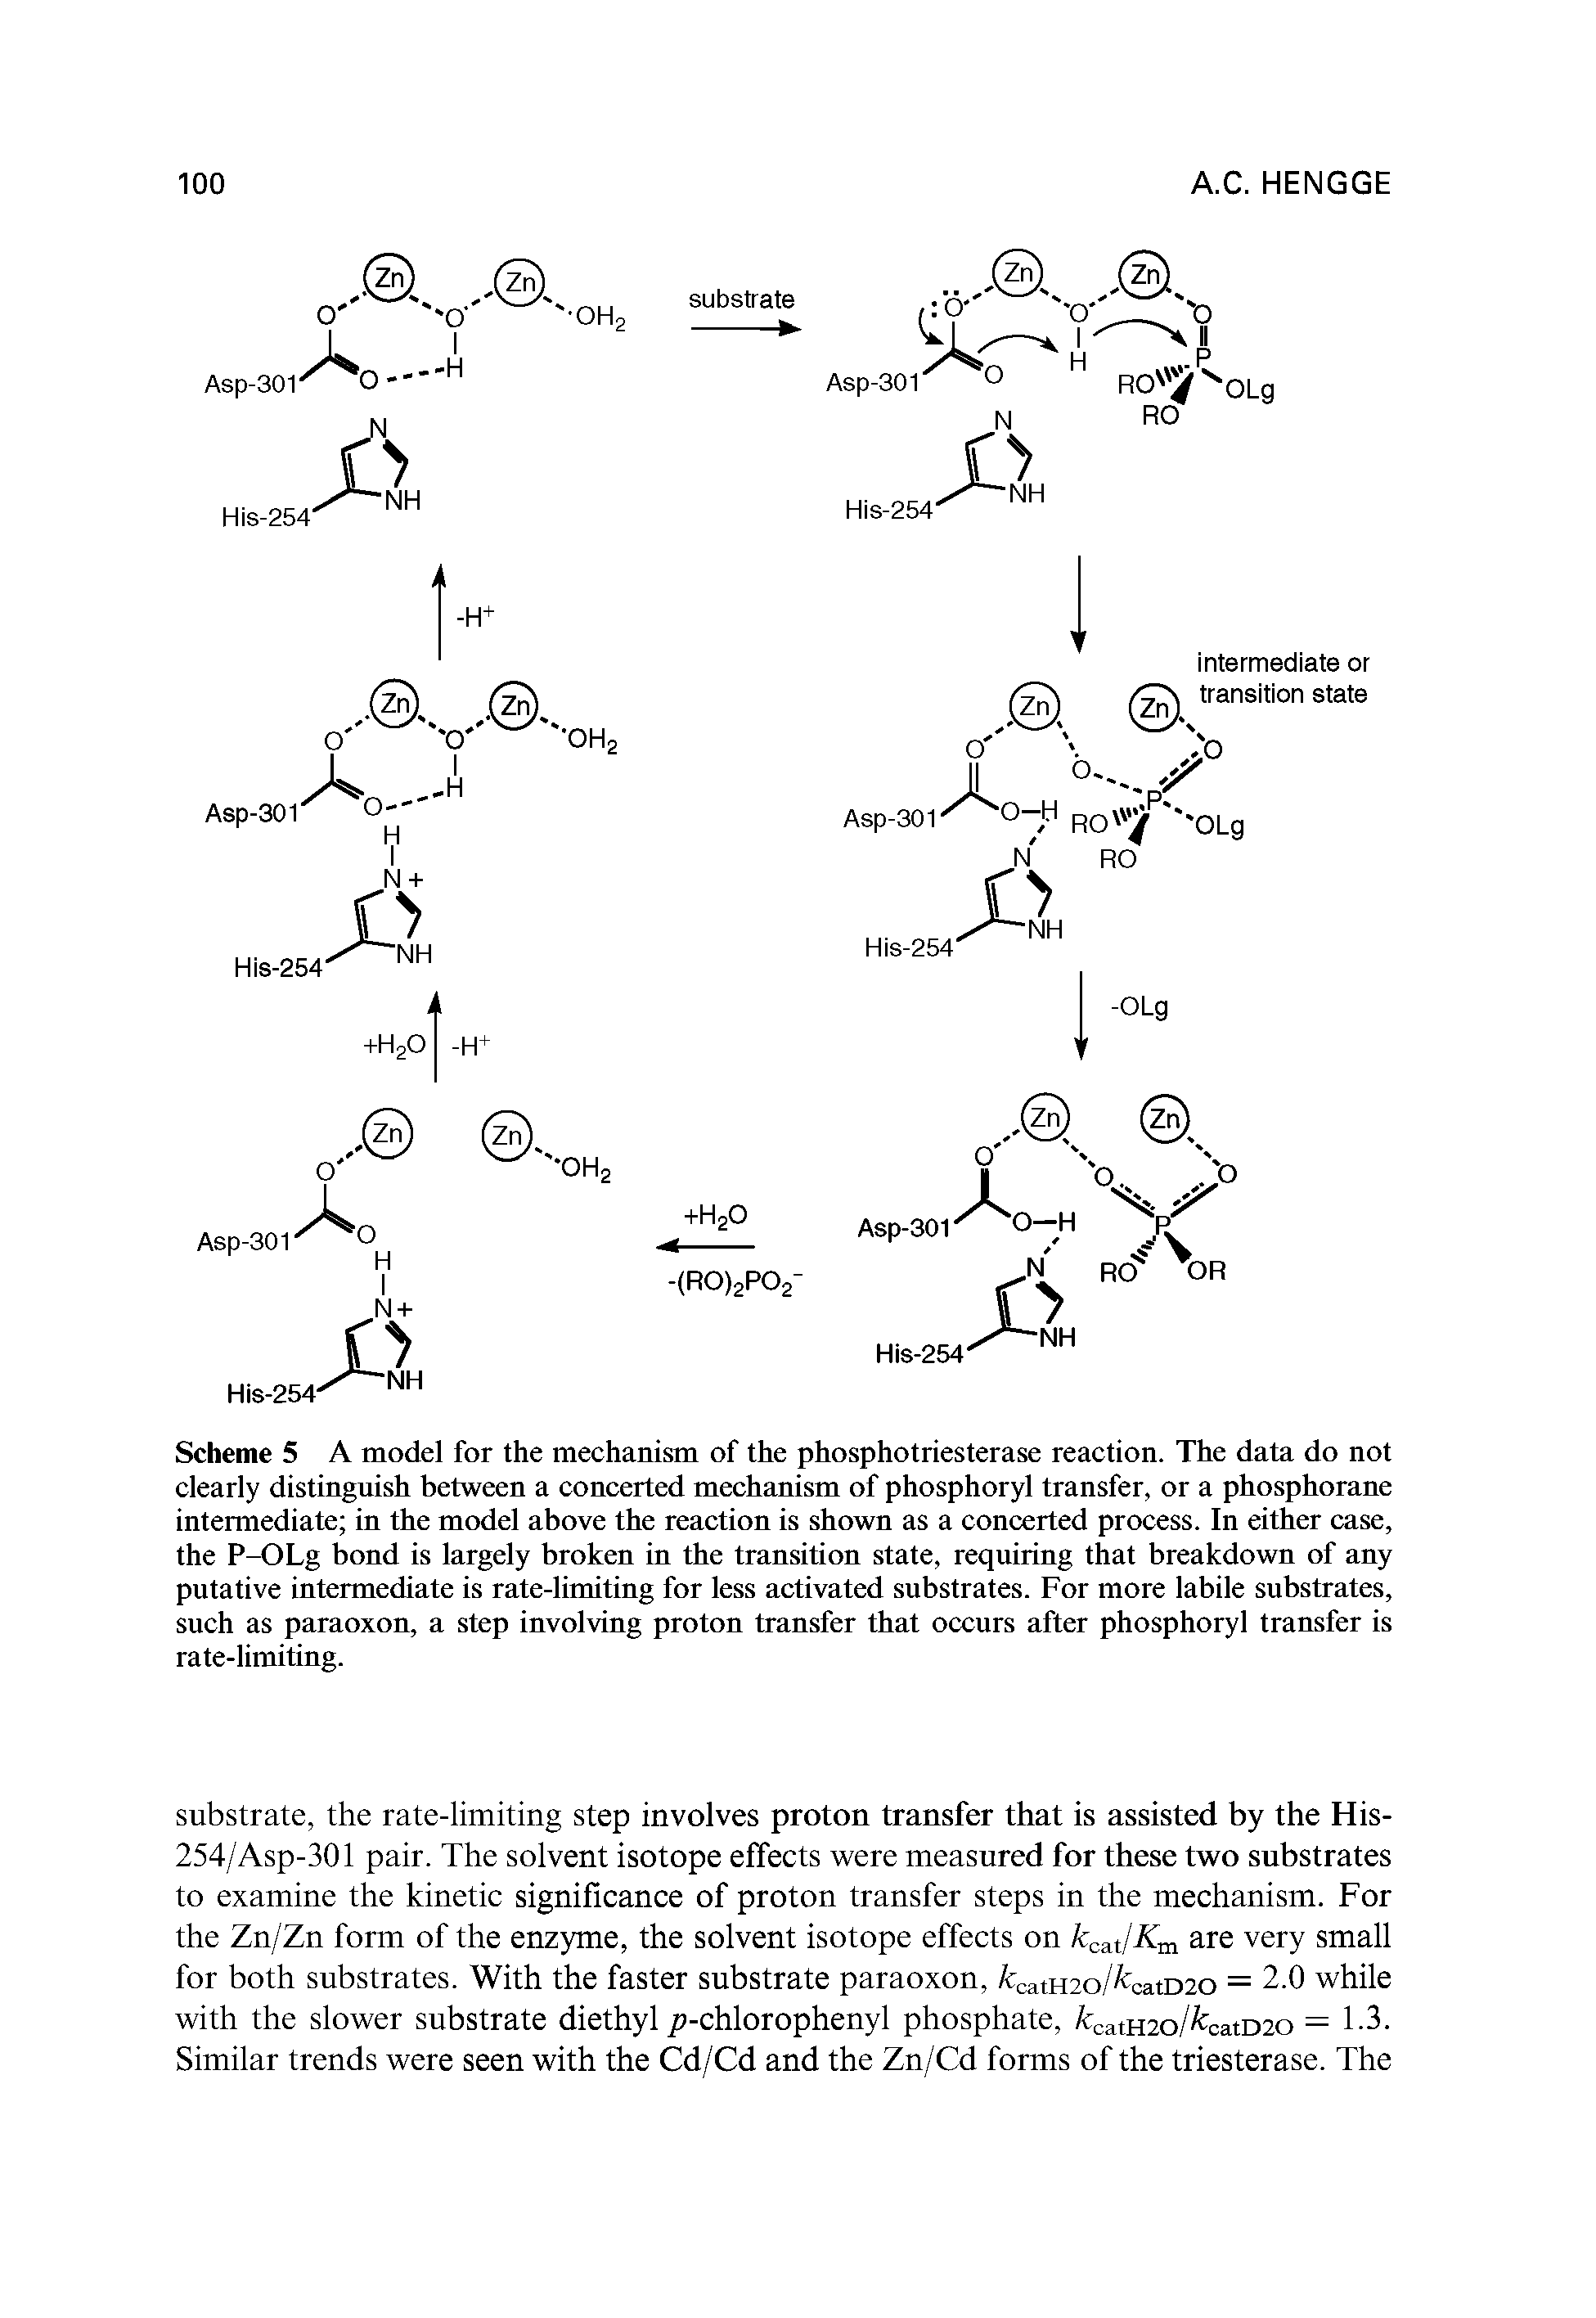 Scheme 5 A model for the mechanism of the phosphotriesterase reaction. The data do not clearly distinguish between a concerted mechanism of phosphoryl transfer, or a phosphorane intermediate in the model above the reaction is shown as a concerted process. In either case, the P-OLg bond is largely broken in the transition state, requiring that breakdown of any putative intermediate is rate-limiting for less activated substrates. For more labile substrates, such as paraoxon, a step involving proton transfer that occurs after phosphoryl transfer is rate-limiting.